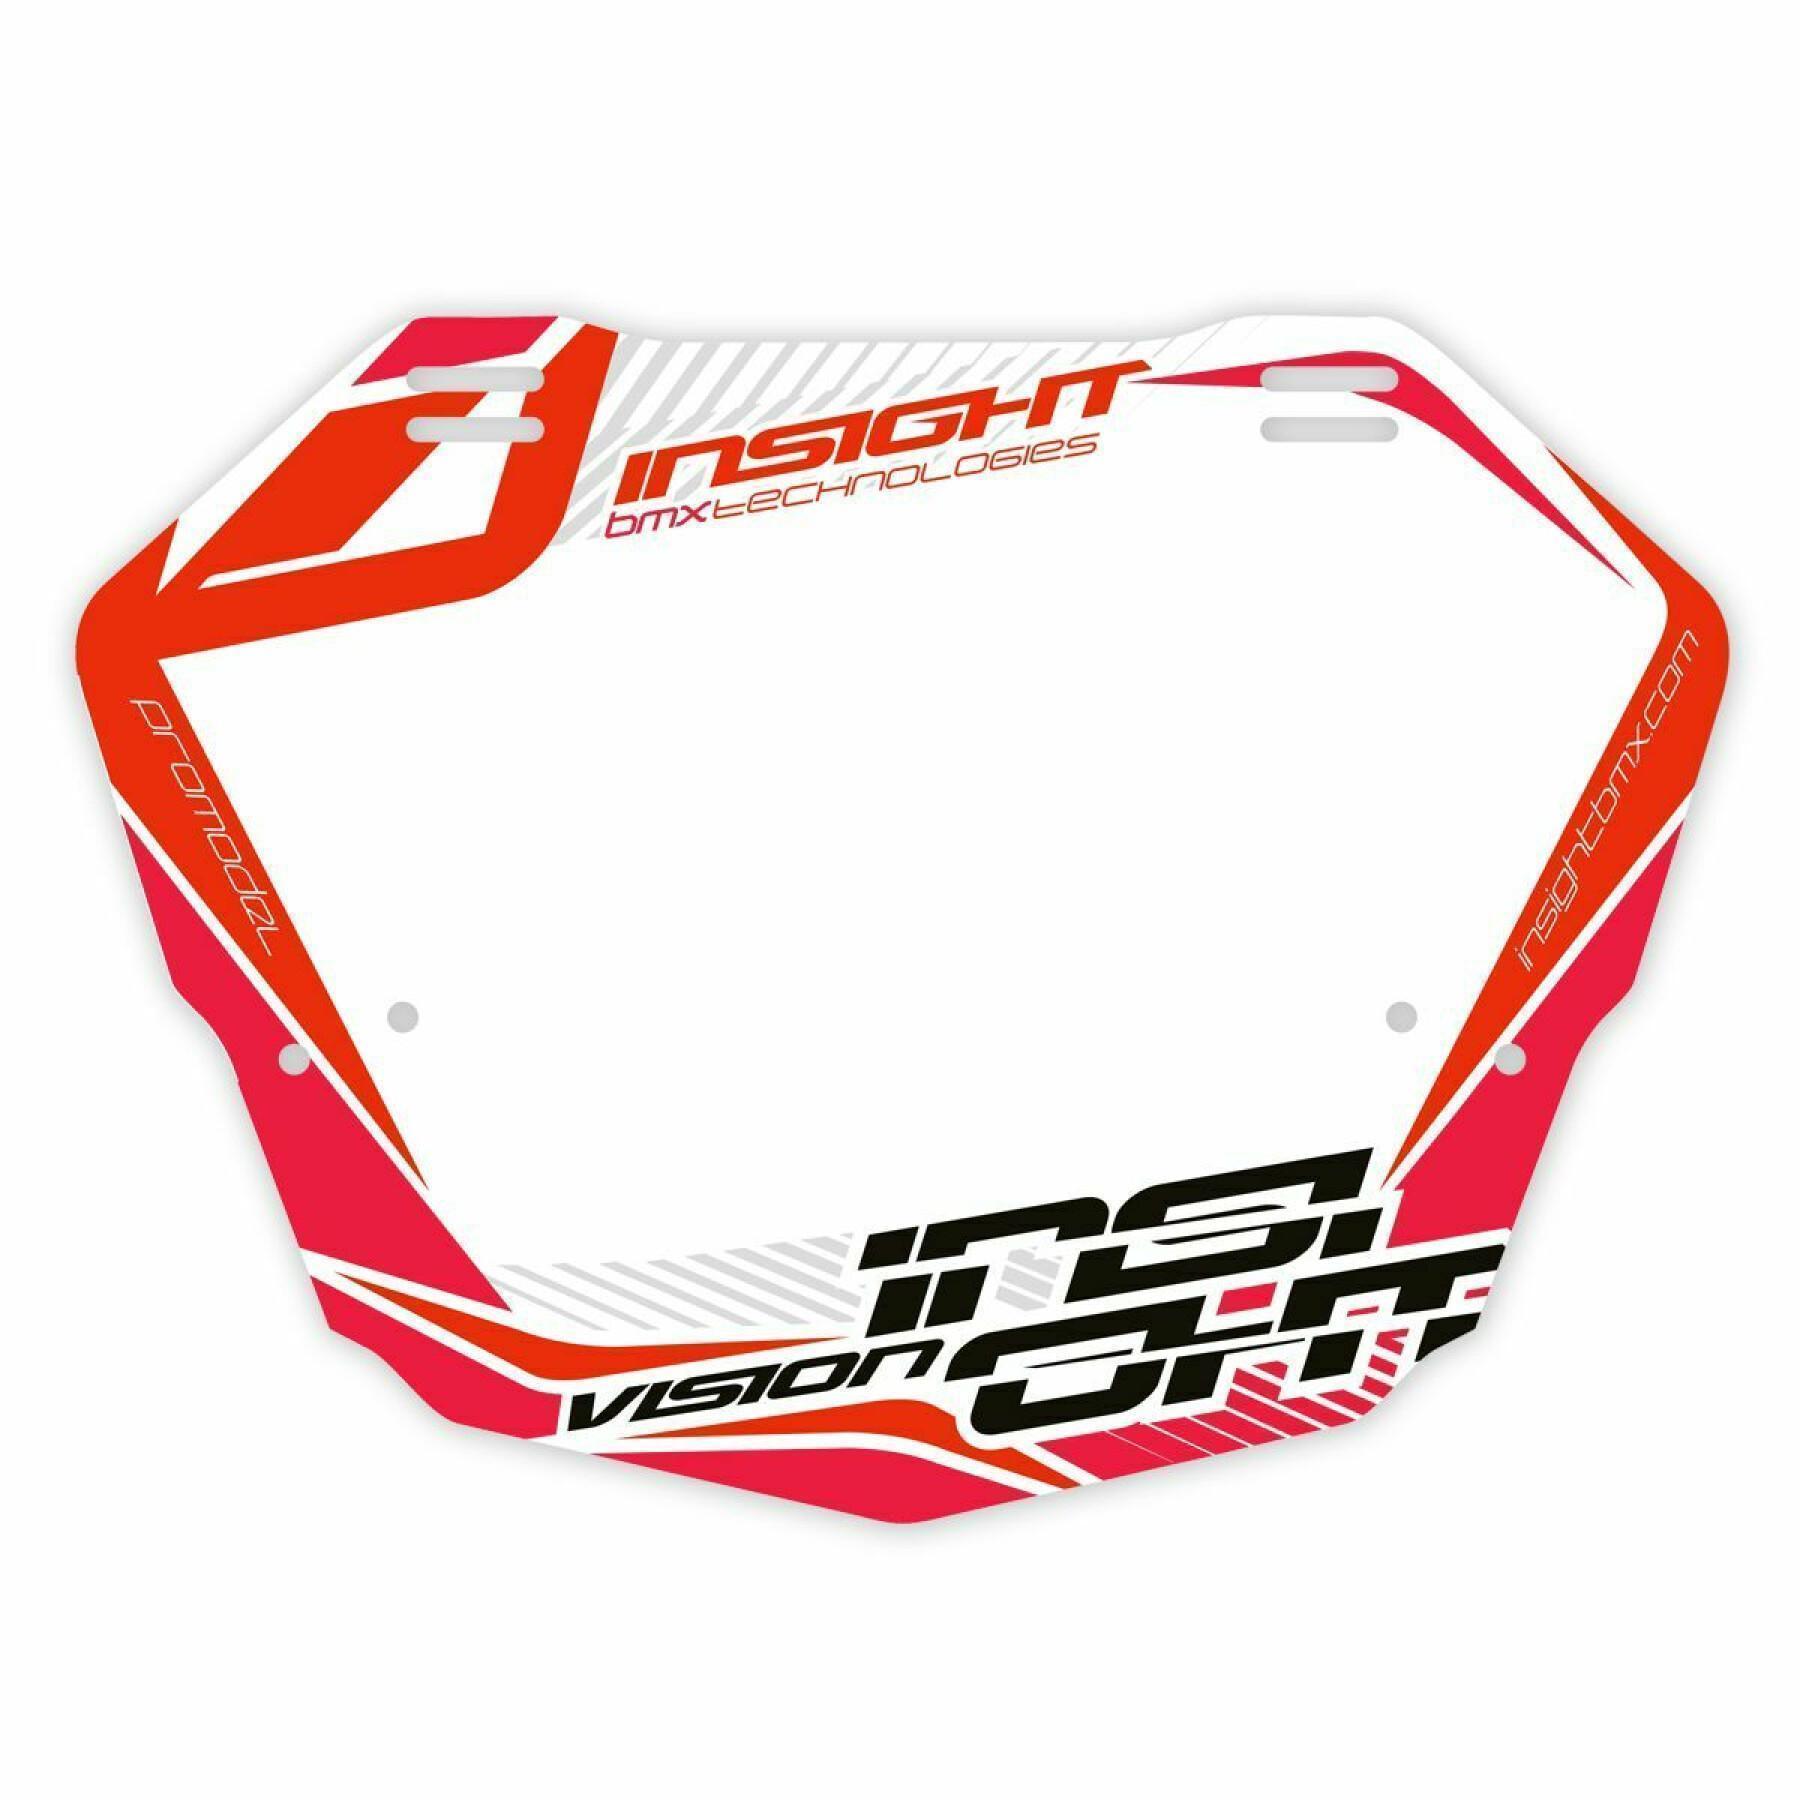 Plaat Insight vision 2 pro